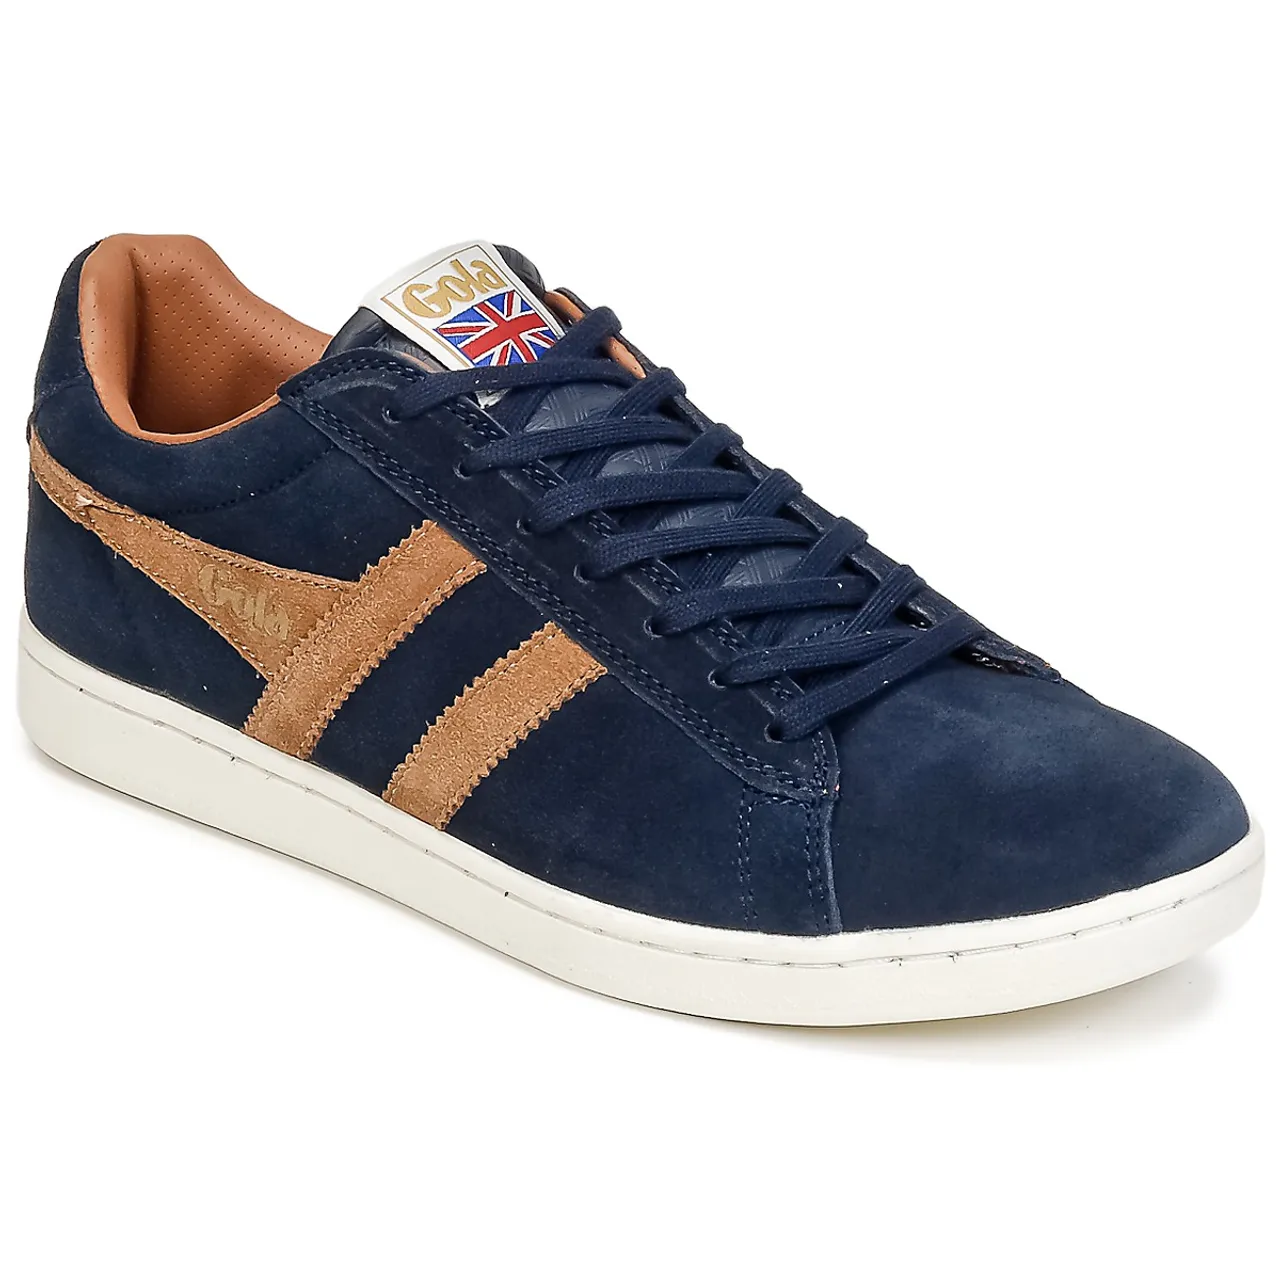 Gola  EQUIPE SUEDE  men's Shoes (Trainers) in Blue